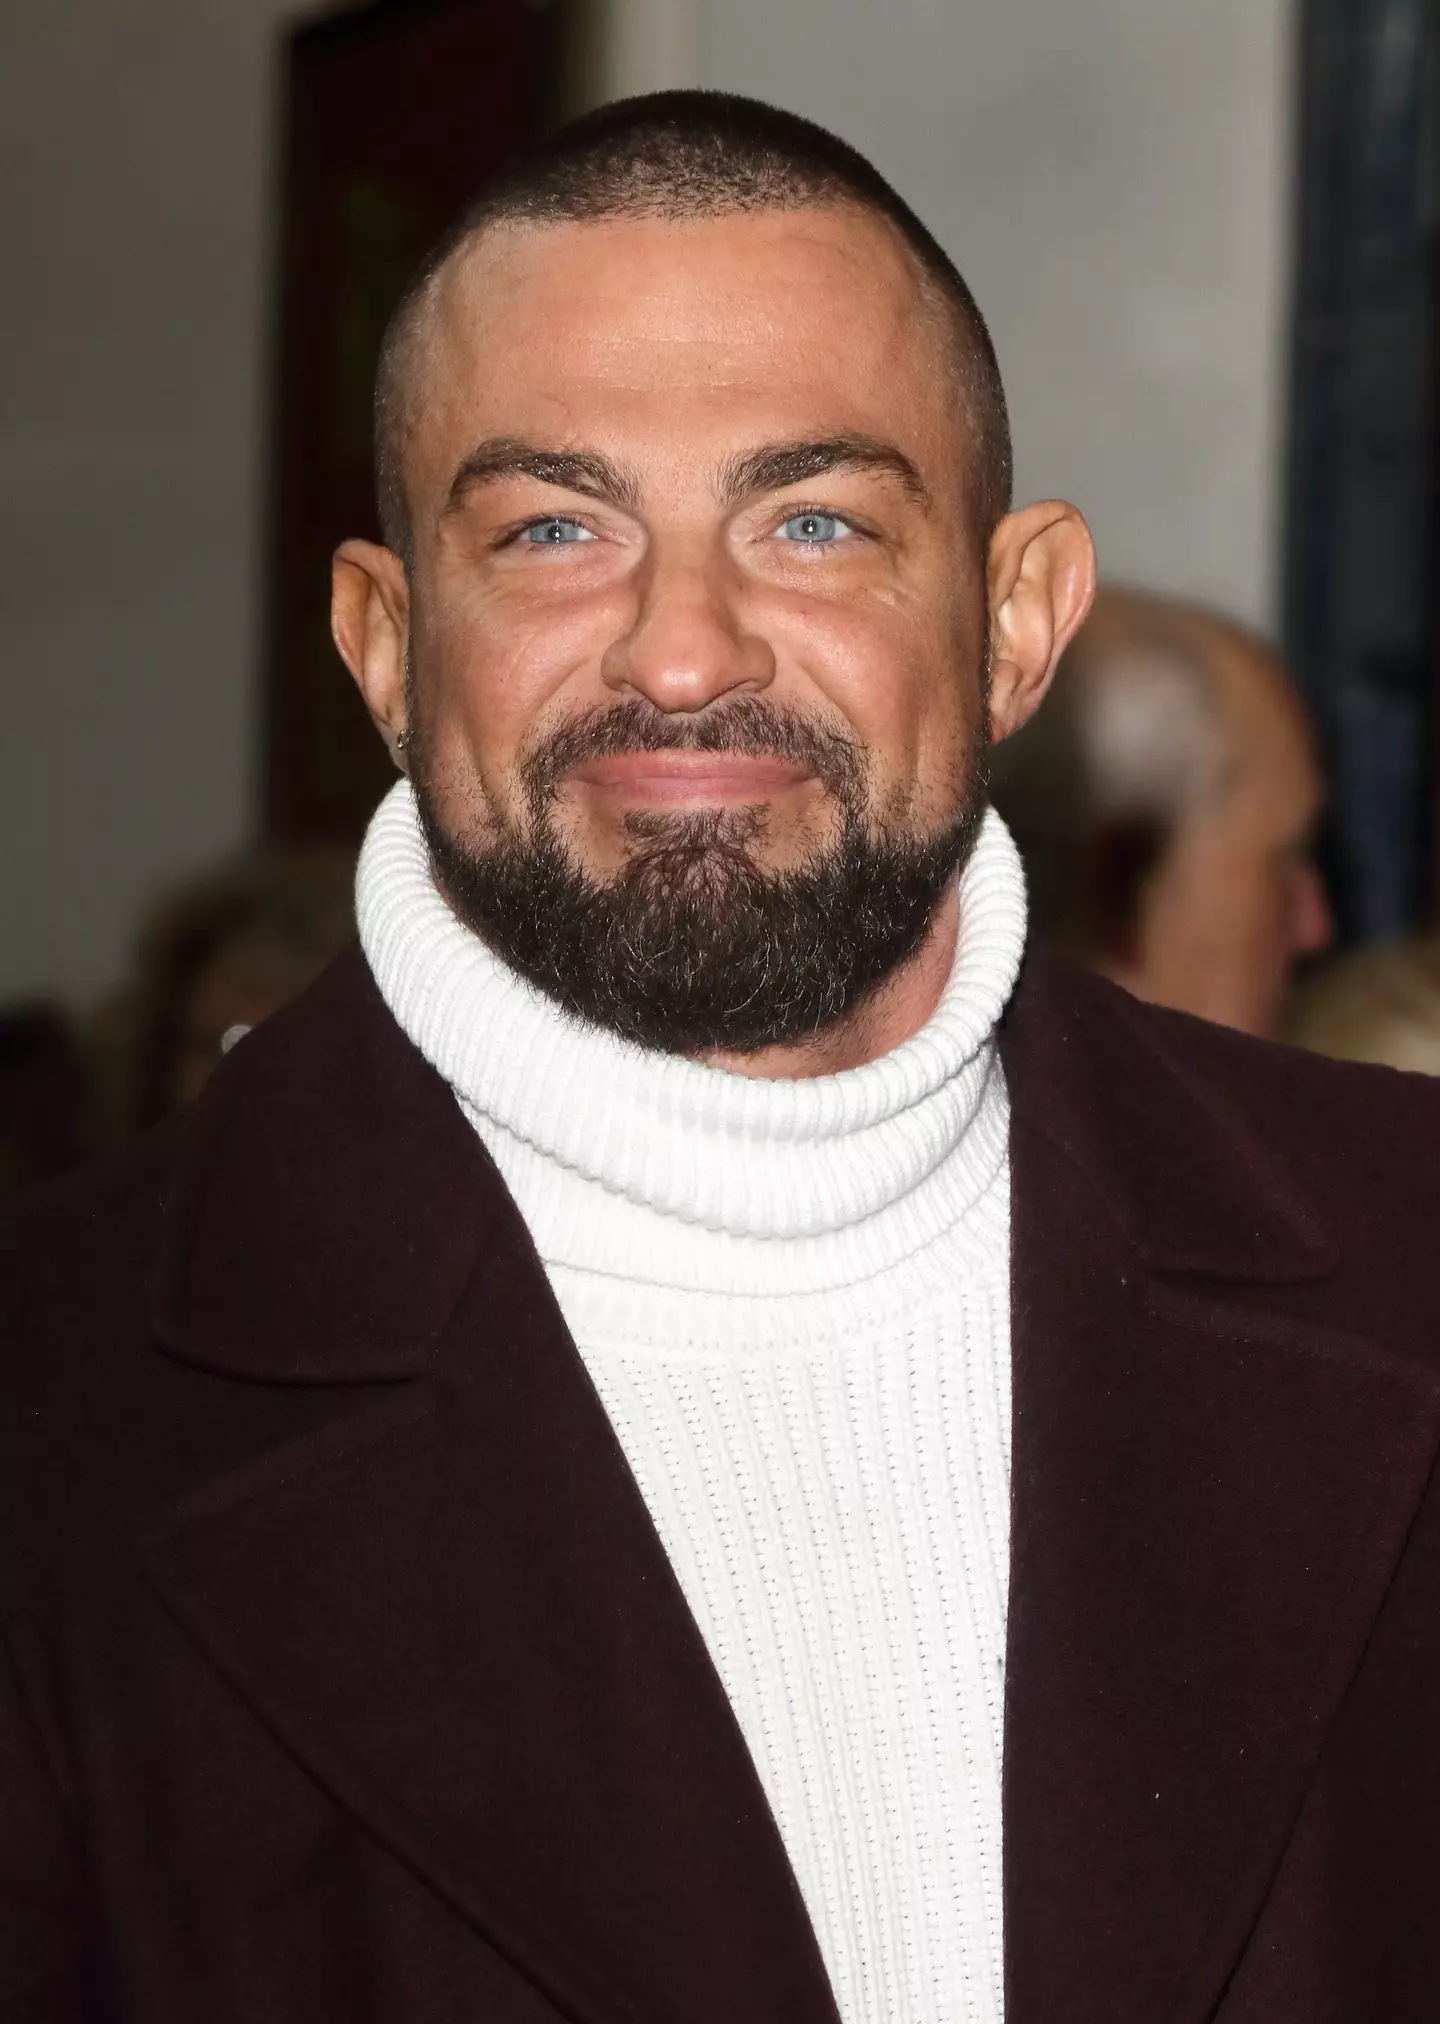 Strictly Come Dancing star Robin Windsor has died aged 44.